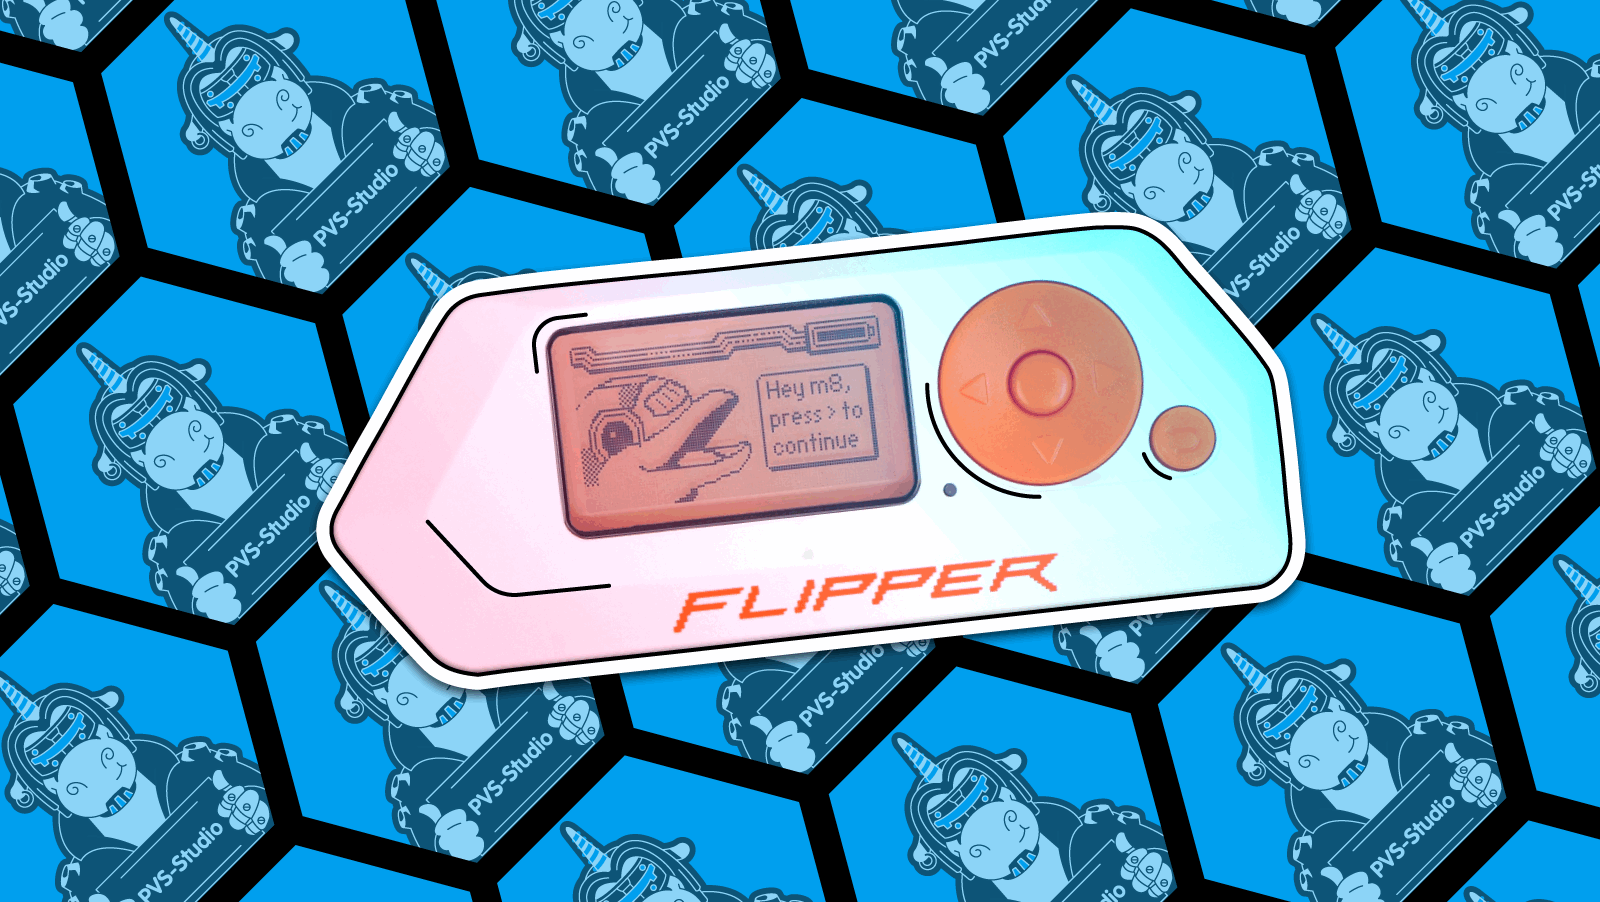 Interview with developers of Flipper Zero — a multi-tool for hackers and  pentesters